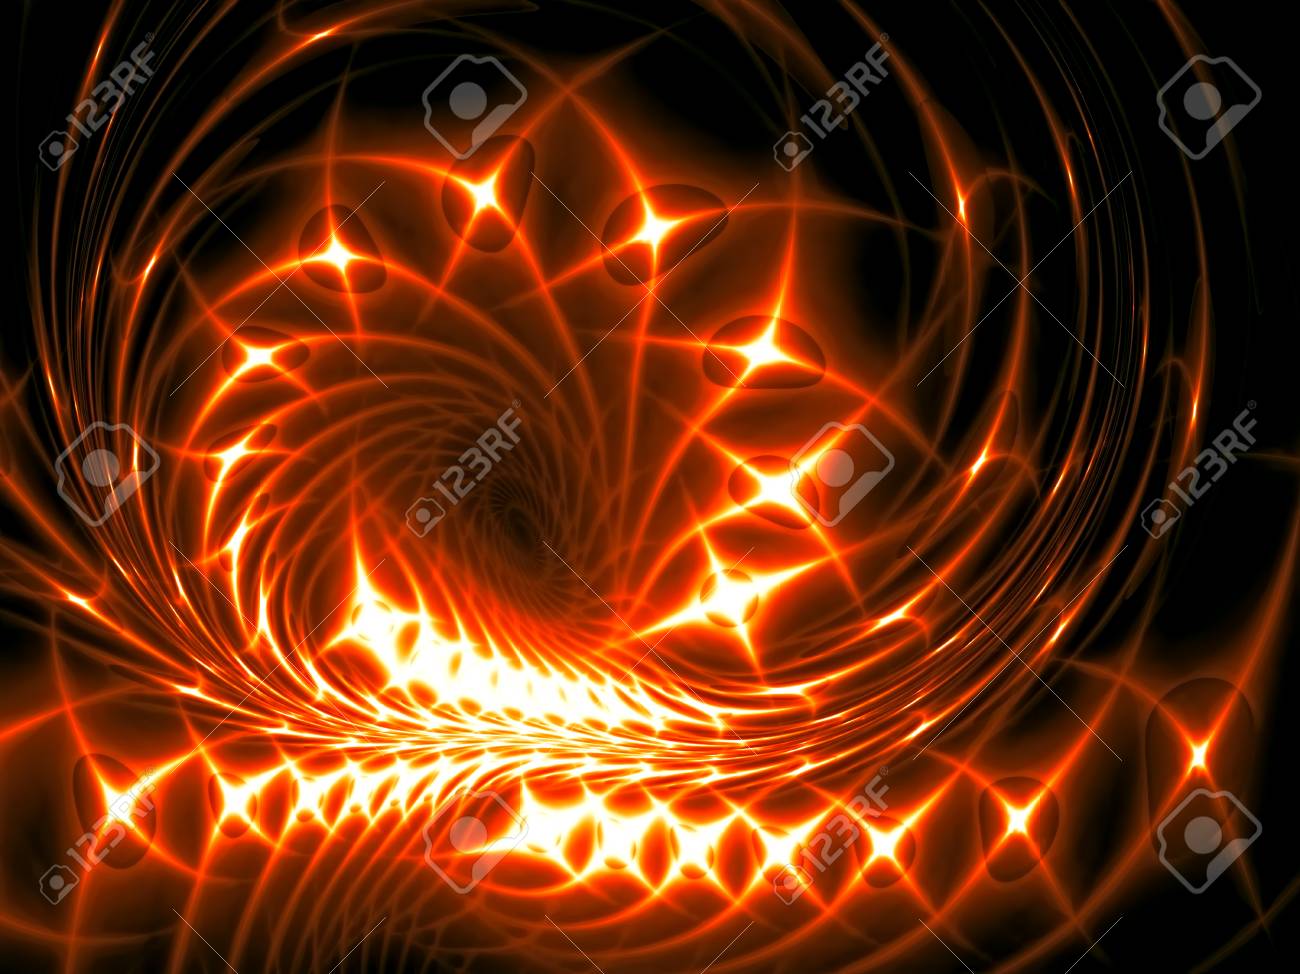 Abstract Fractal Background Puter Generated Image Modern